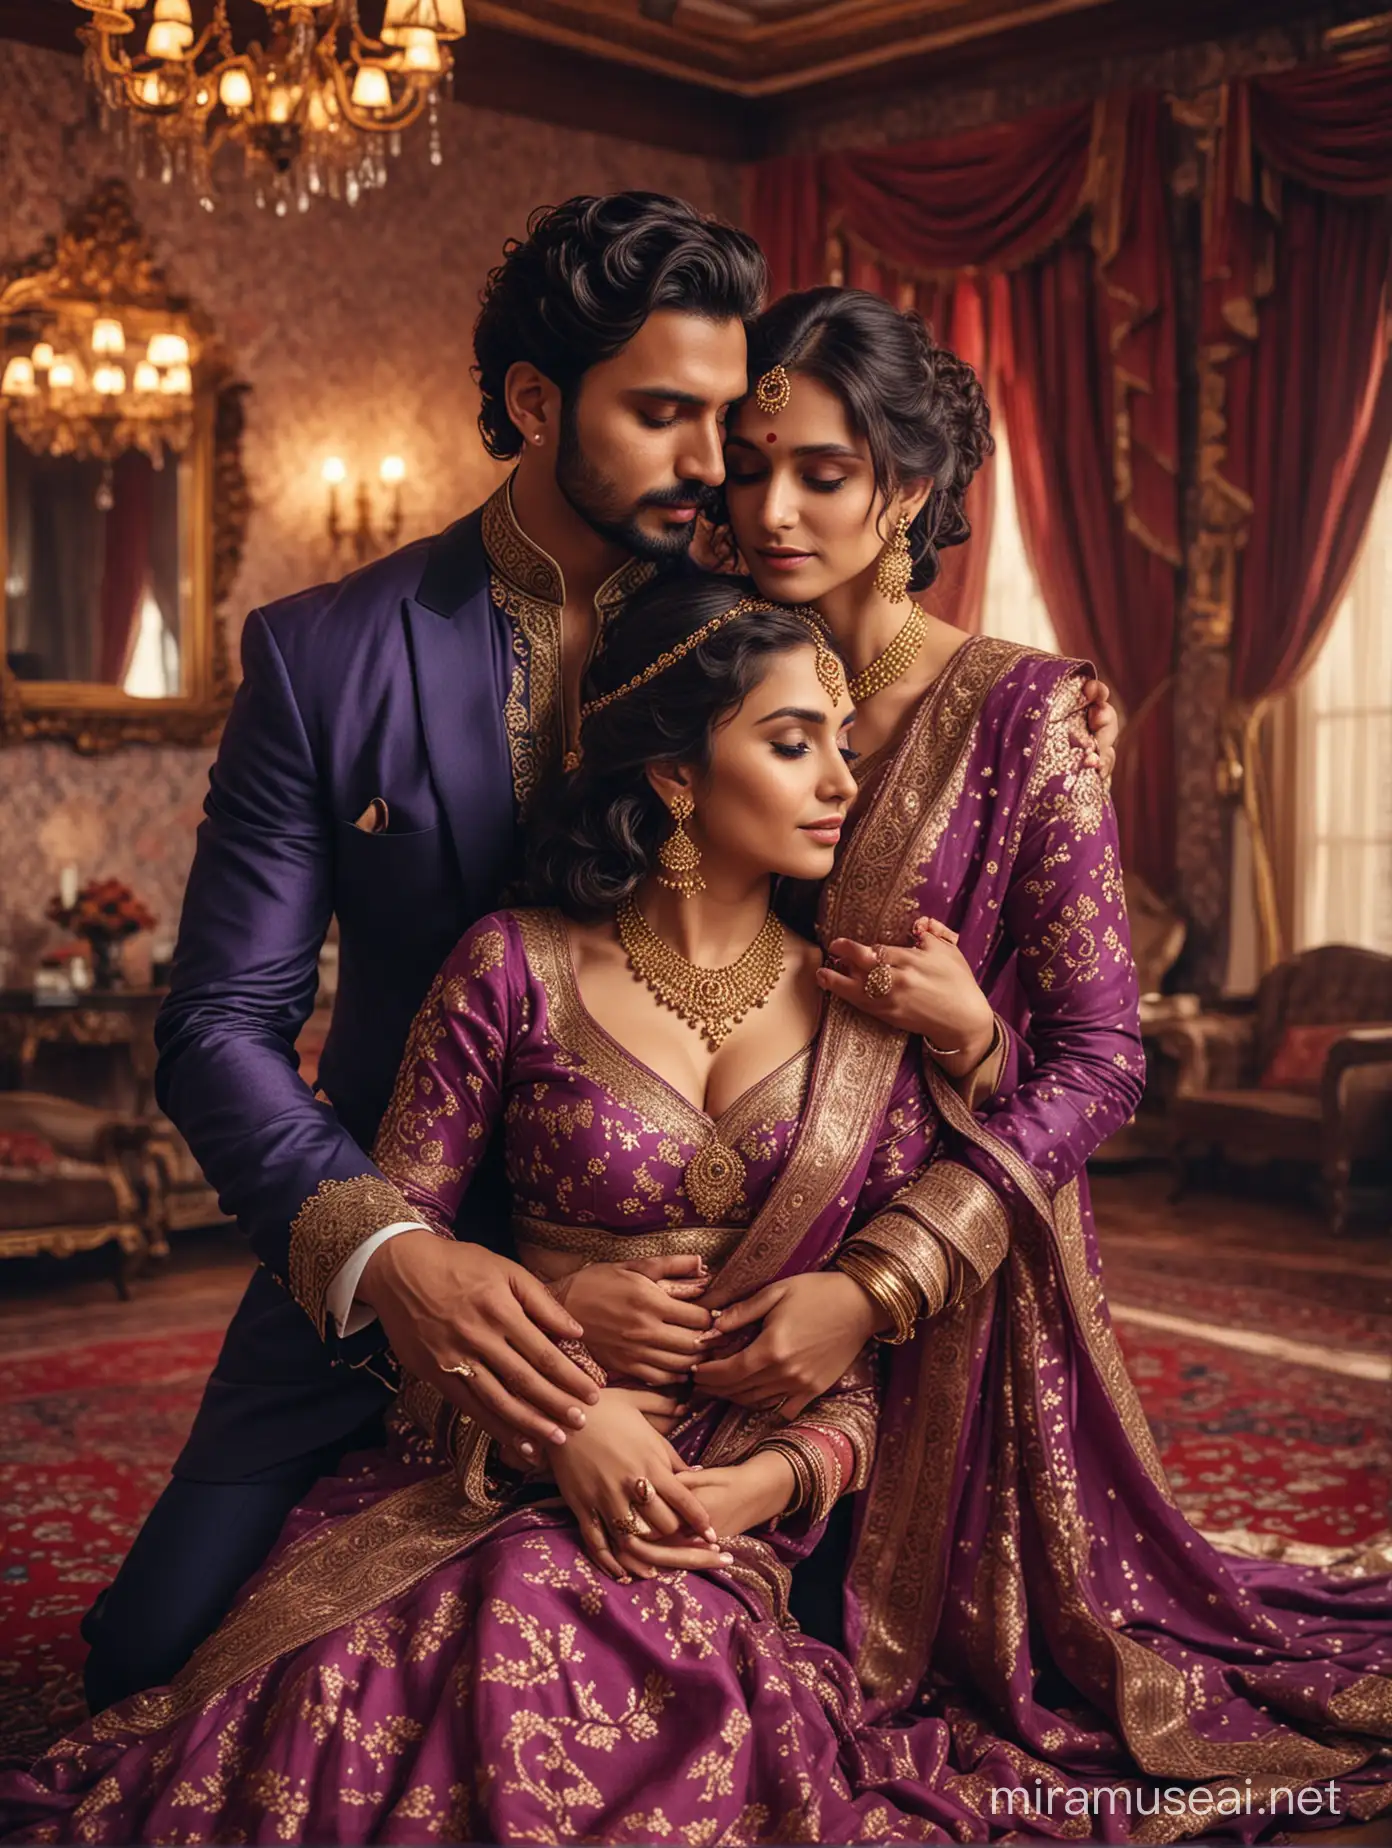 Romantic Embrace of Elegant Indian Couple in Vintage Palace Interior